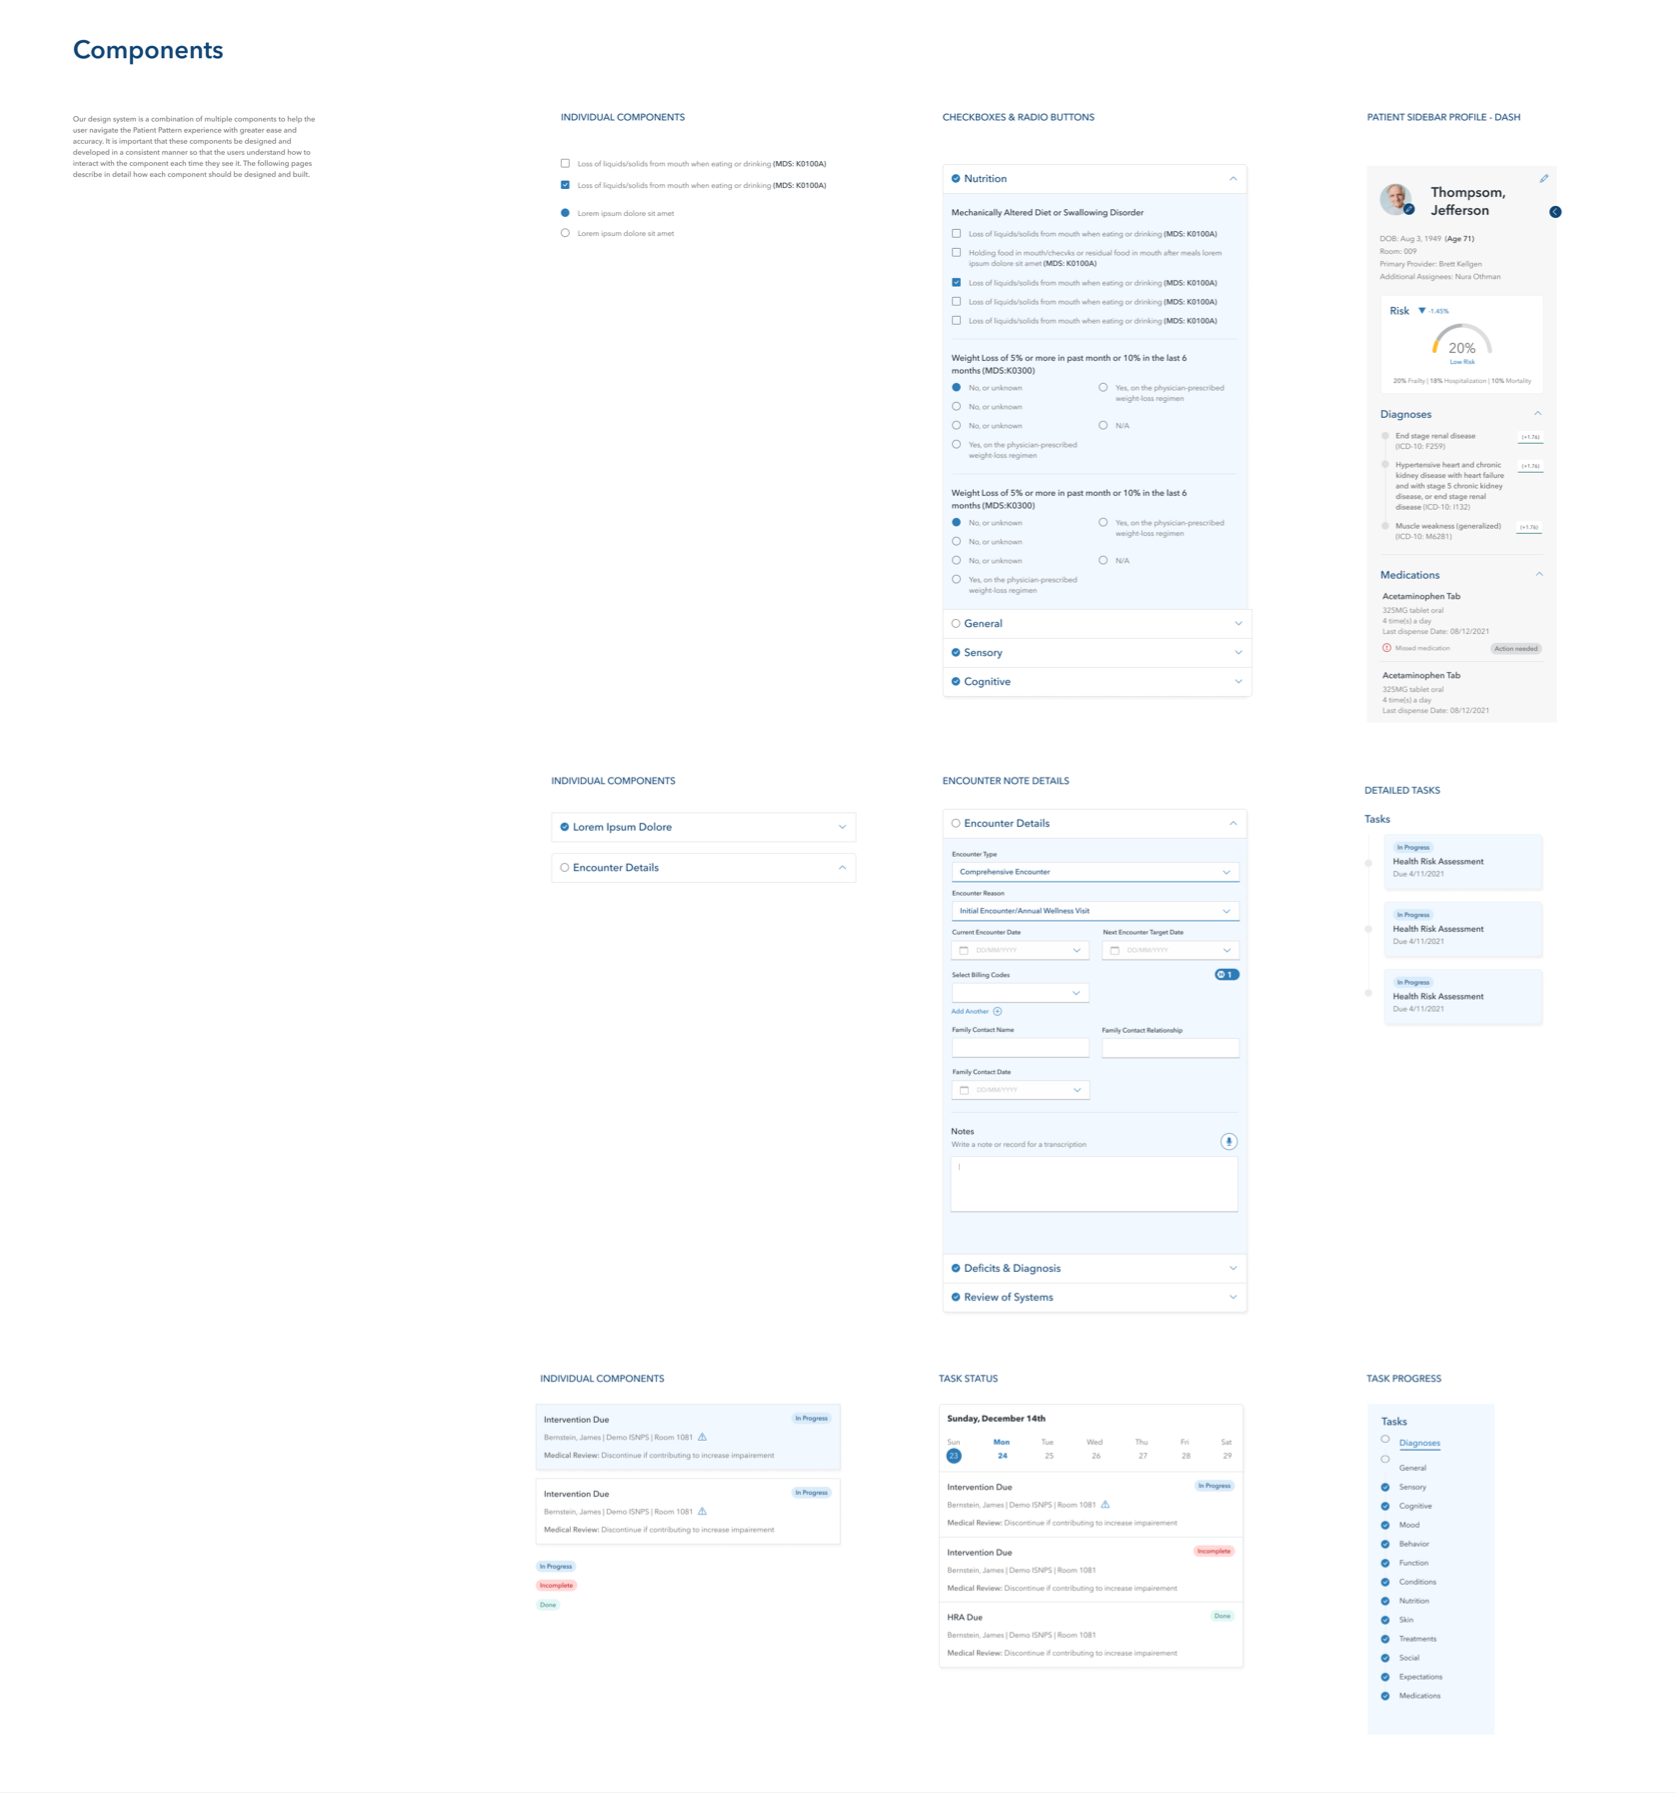 Sample components from the patient pattern design system